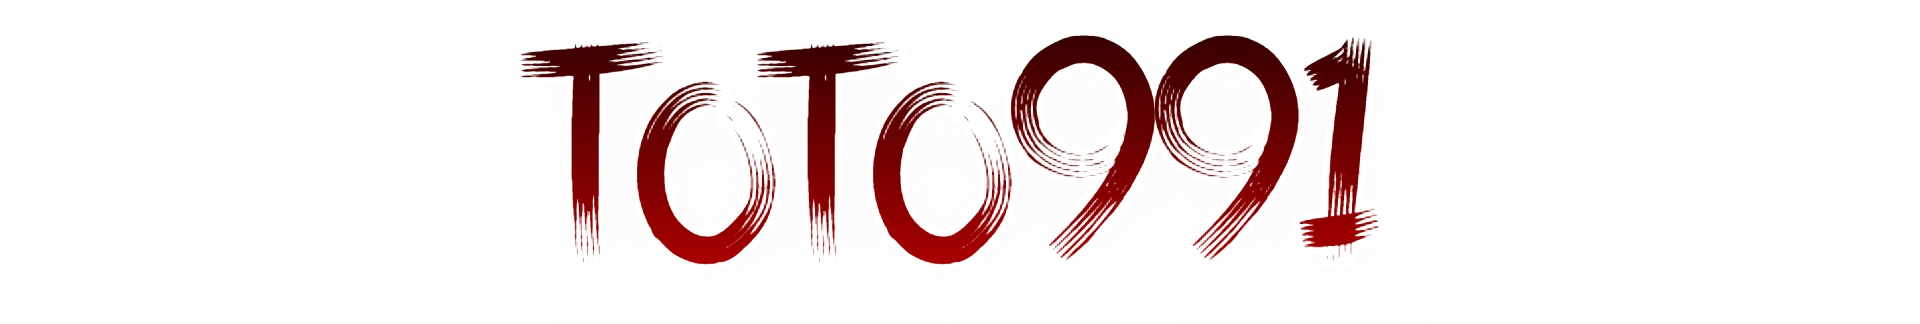 TOTO991